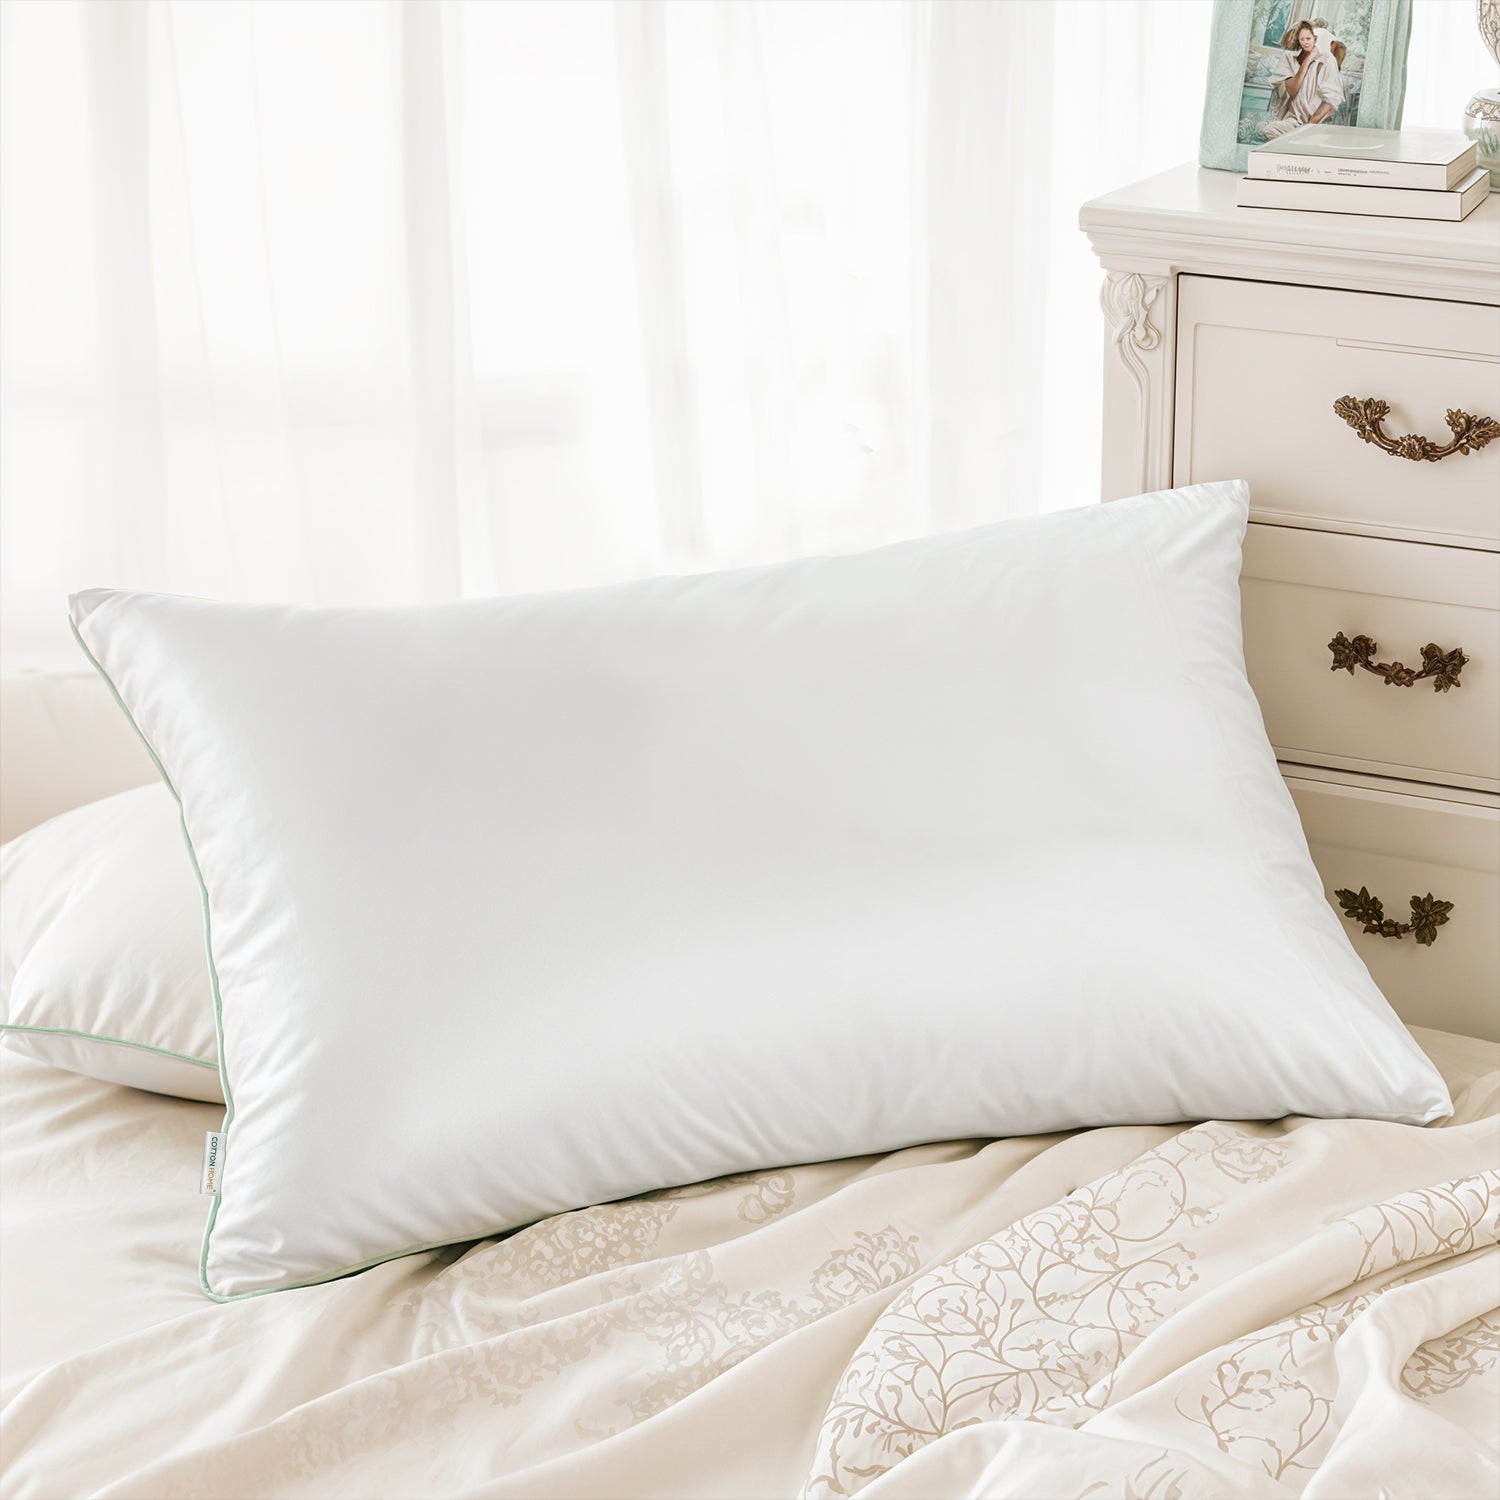 Premium Bamboo Silk Pillow 50x75cm - White with Mint Cord